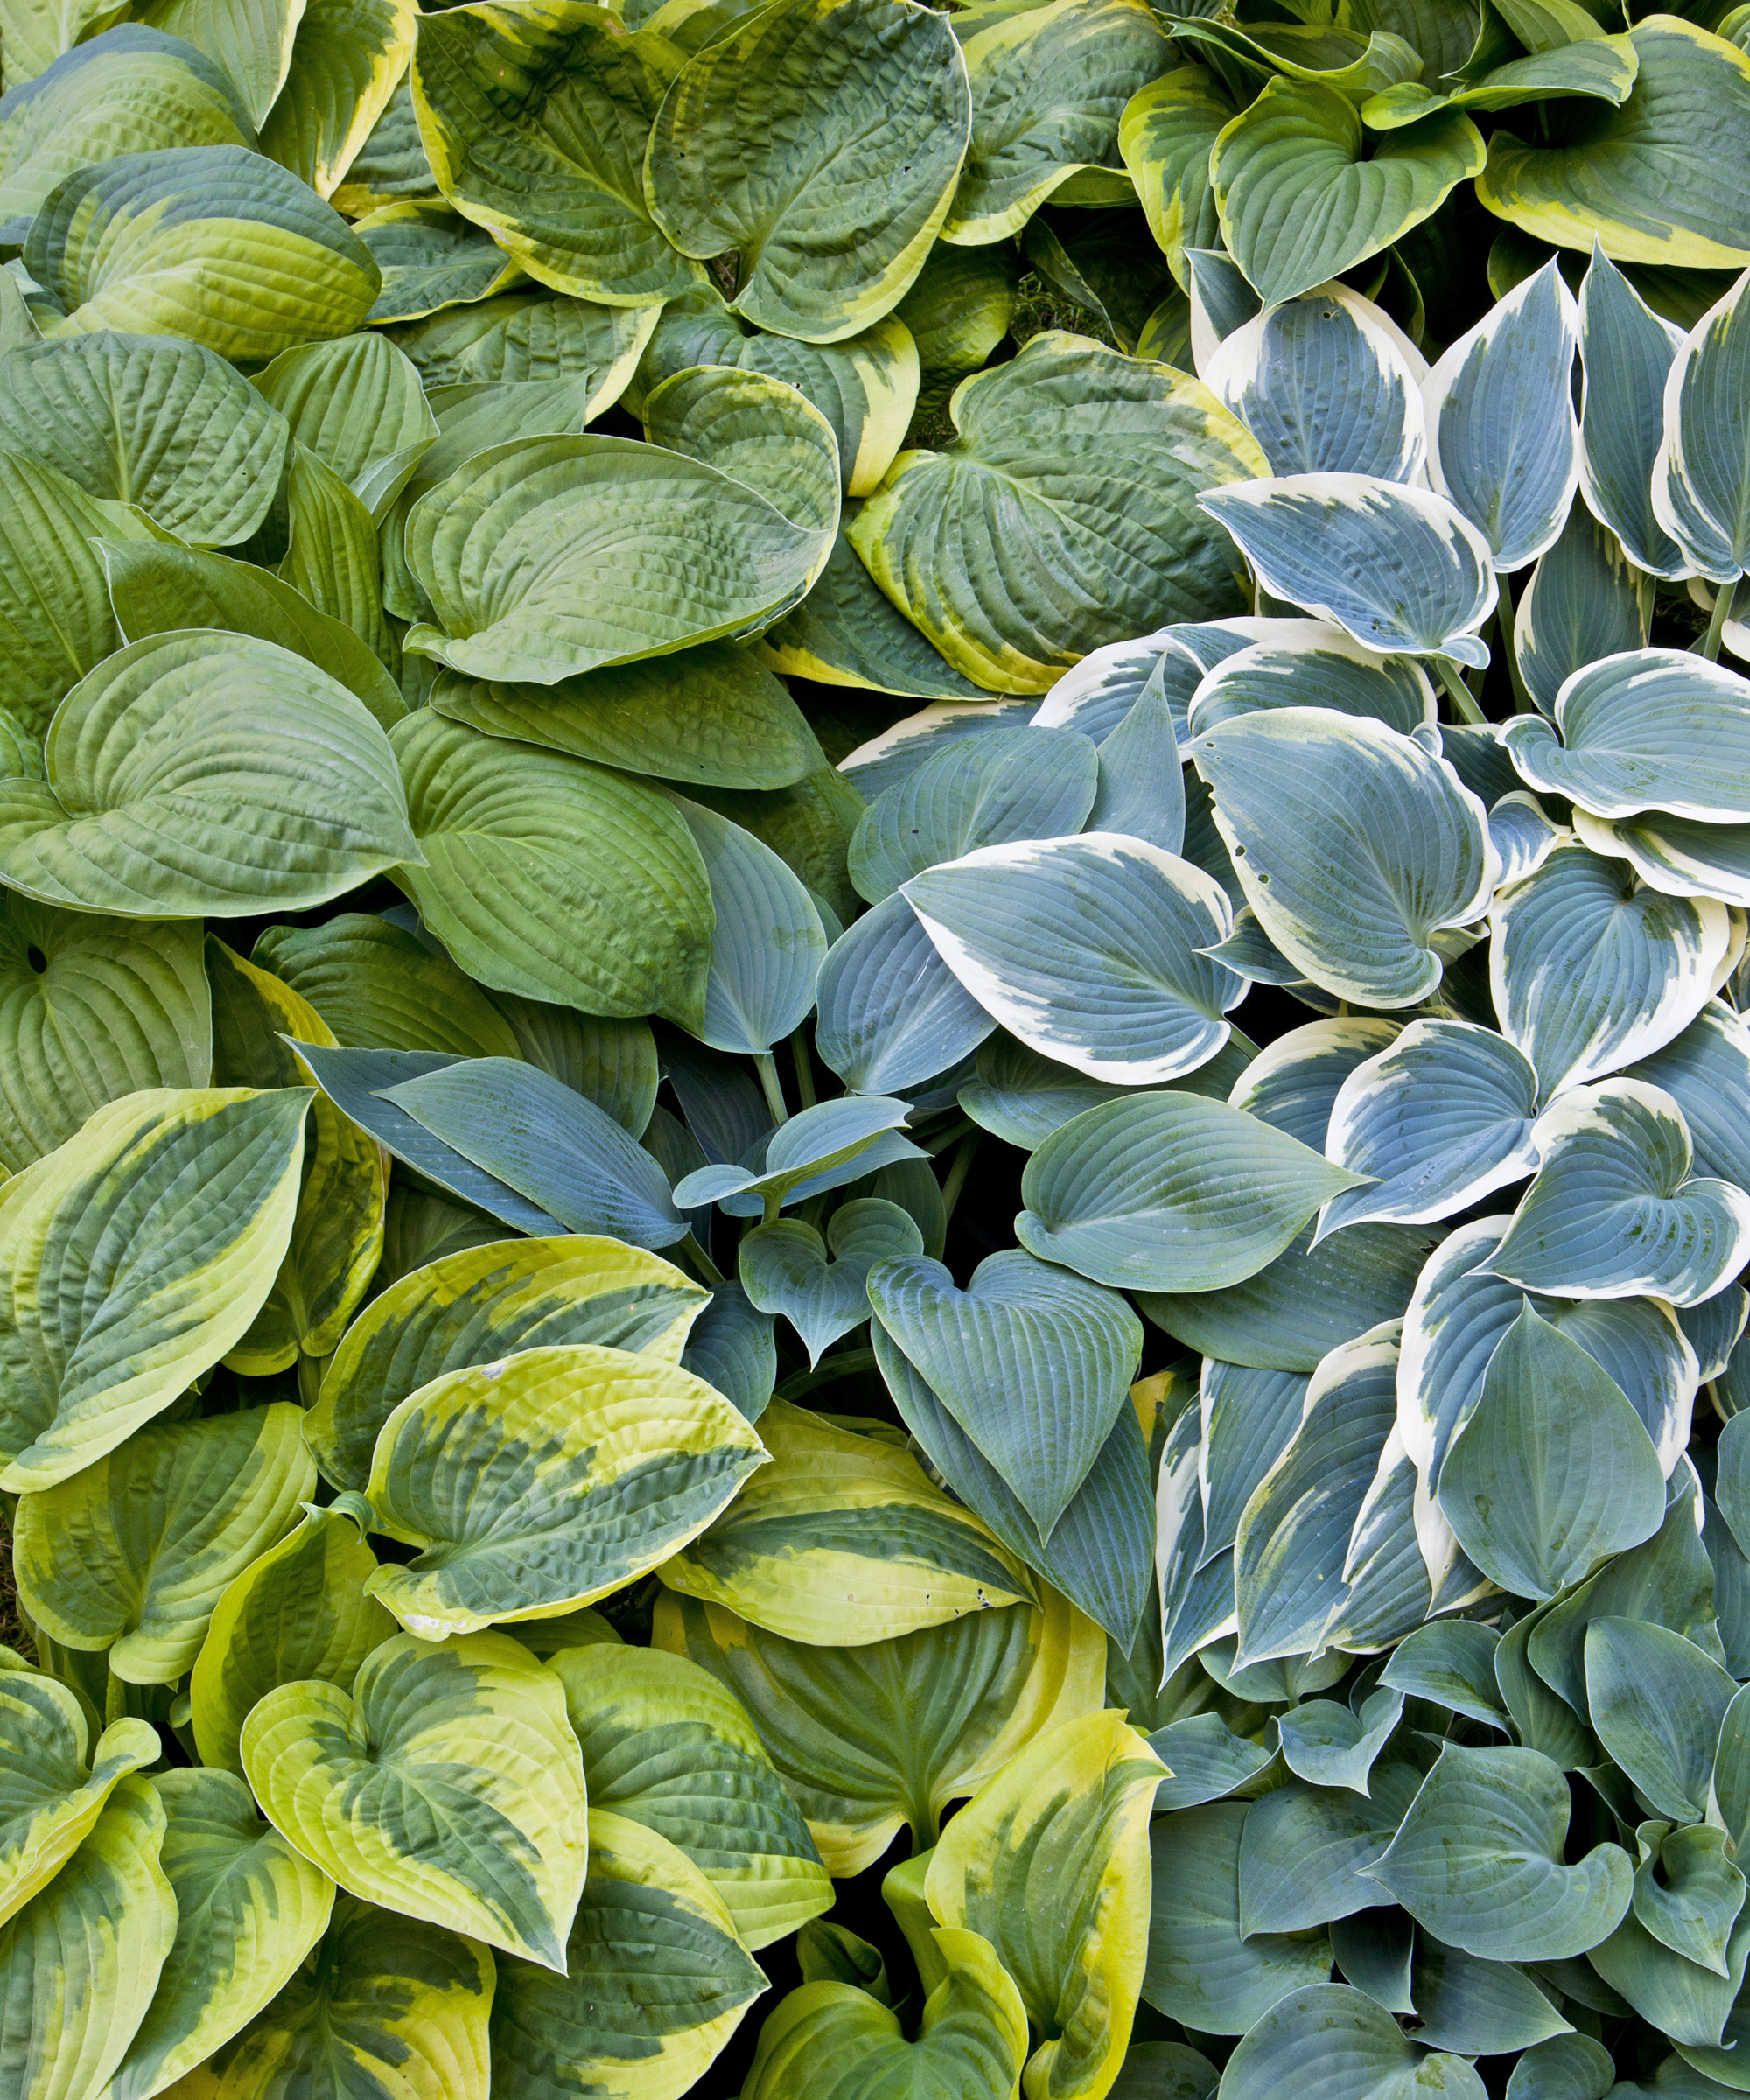 Hostas grouped together in the garden